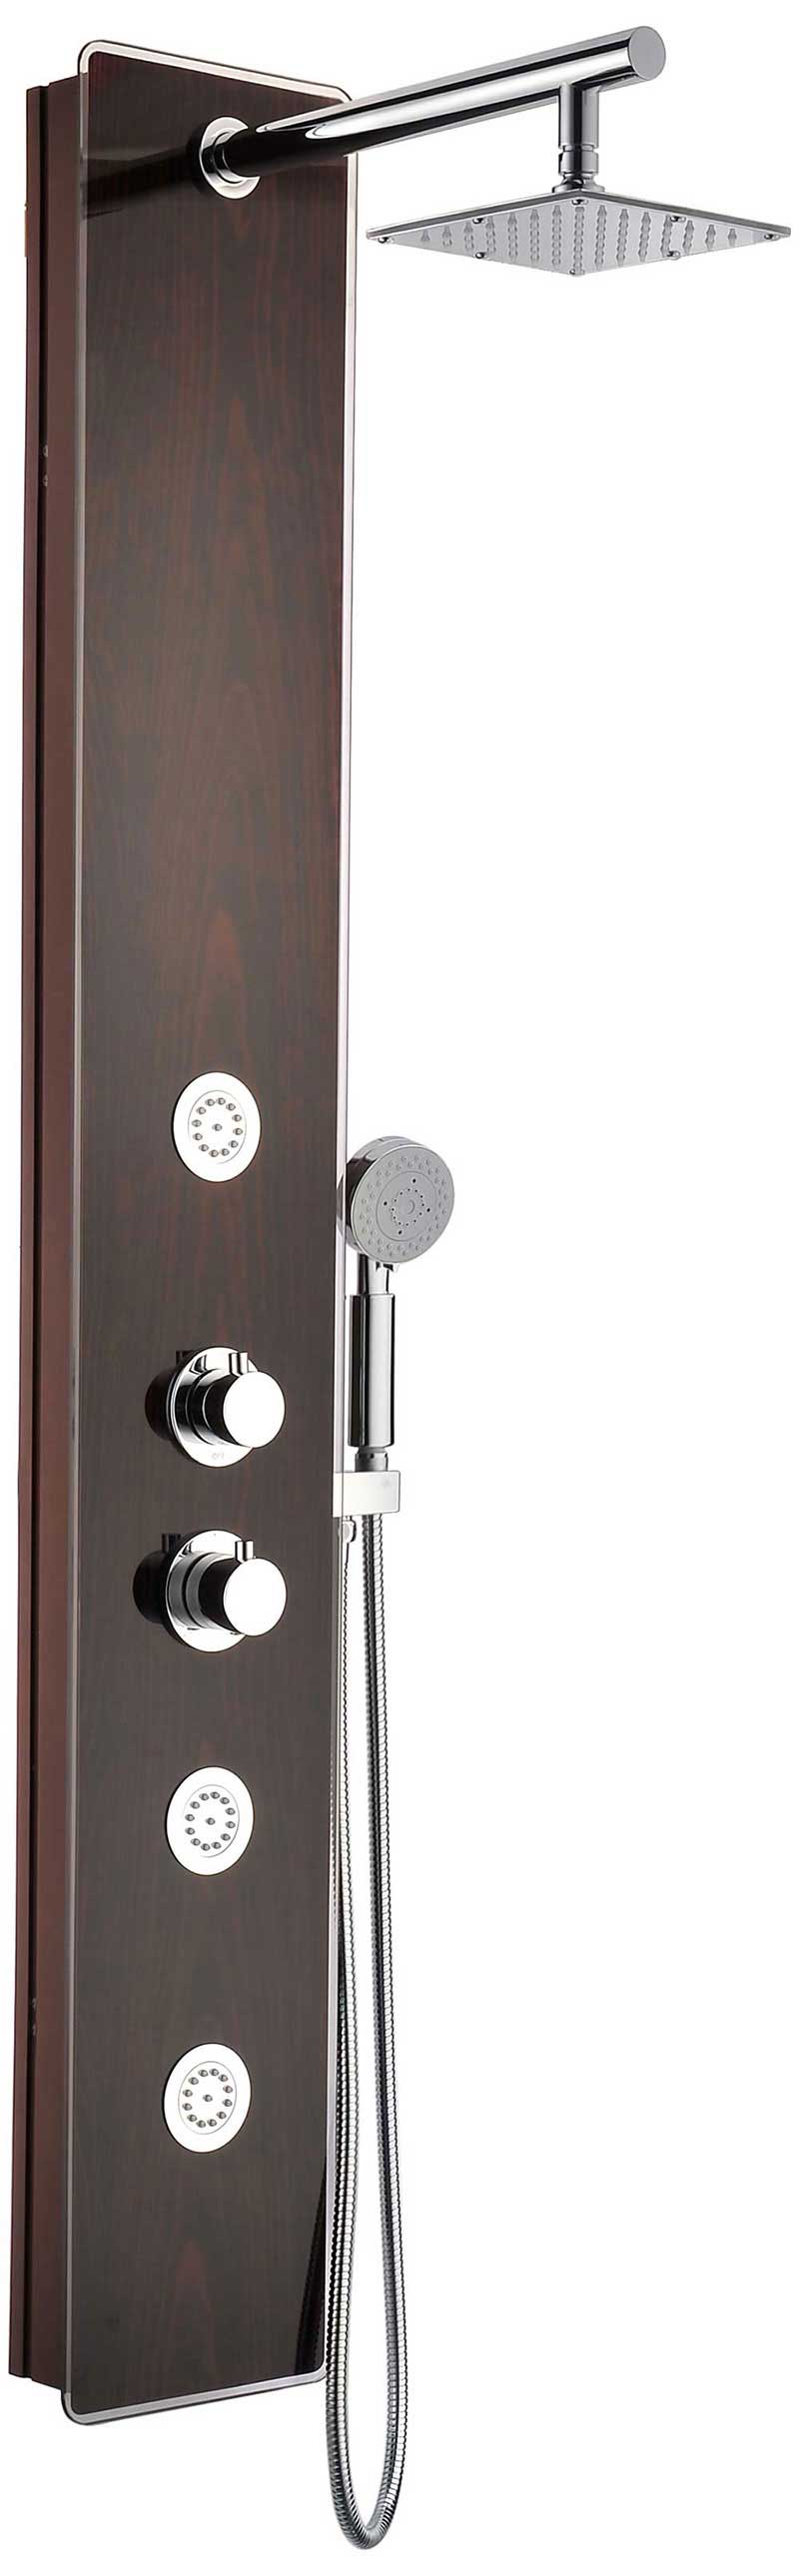 Anzzi Pure 59 in. 3-Jetted Full Body Shower Panel with Heavy Rain Shower and Spray Wand in Mahogany Style Deco-Glass